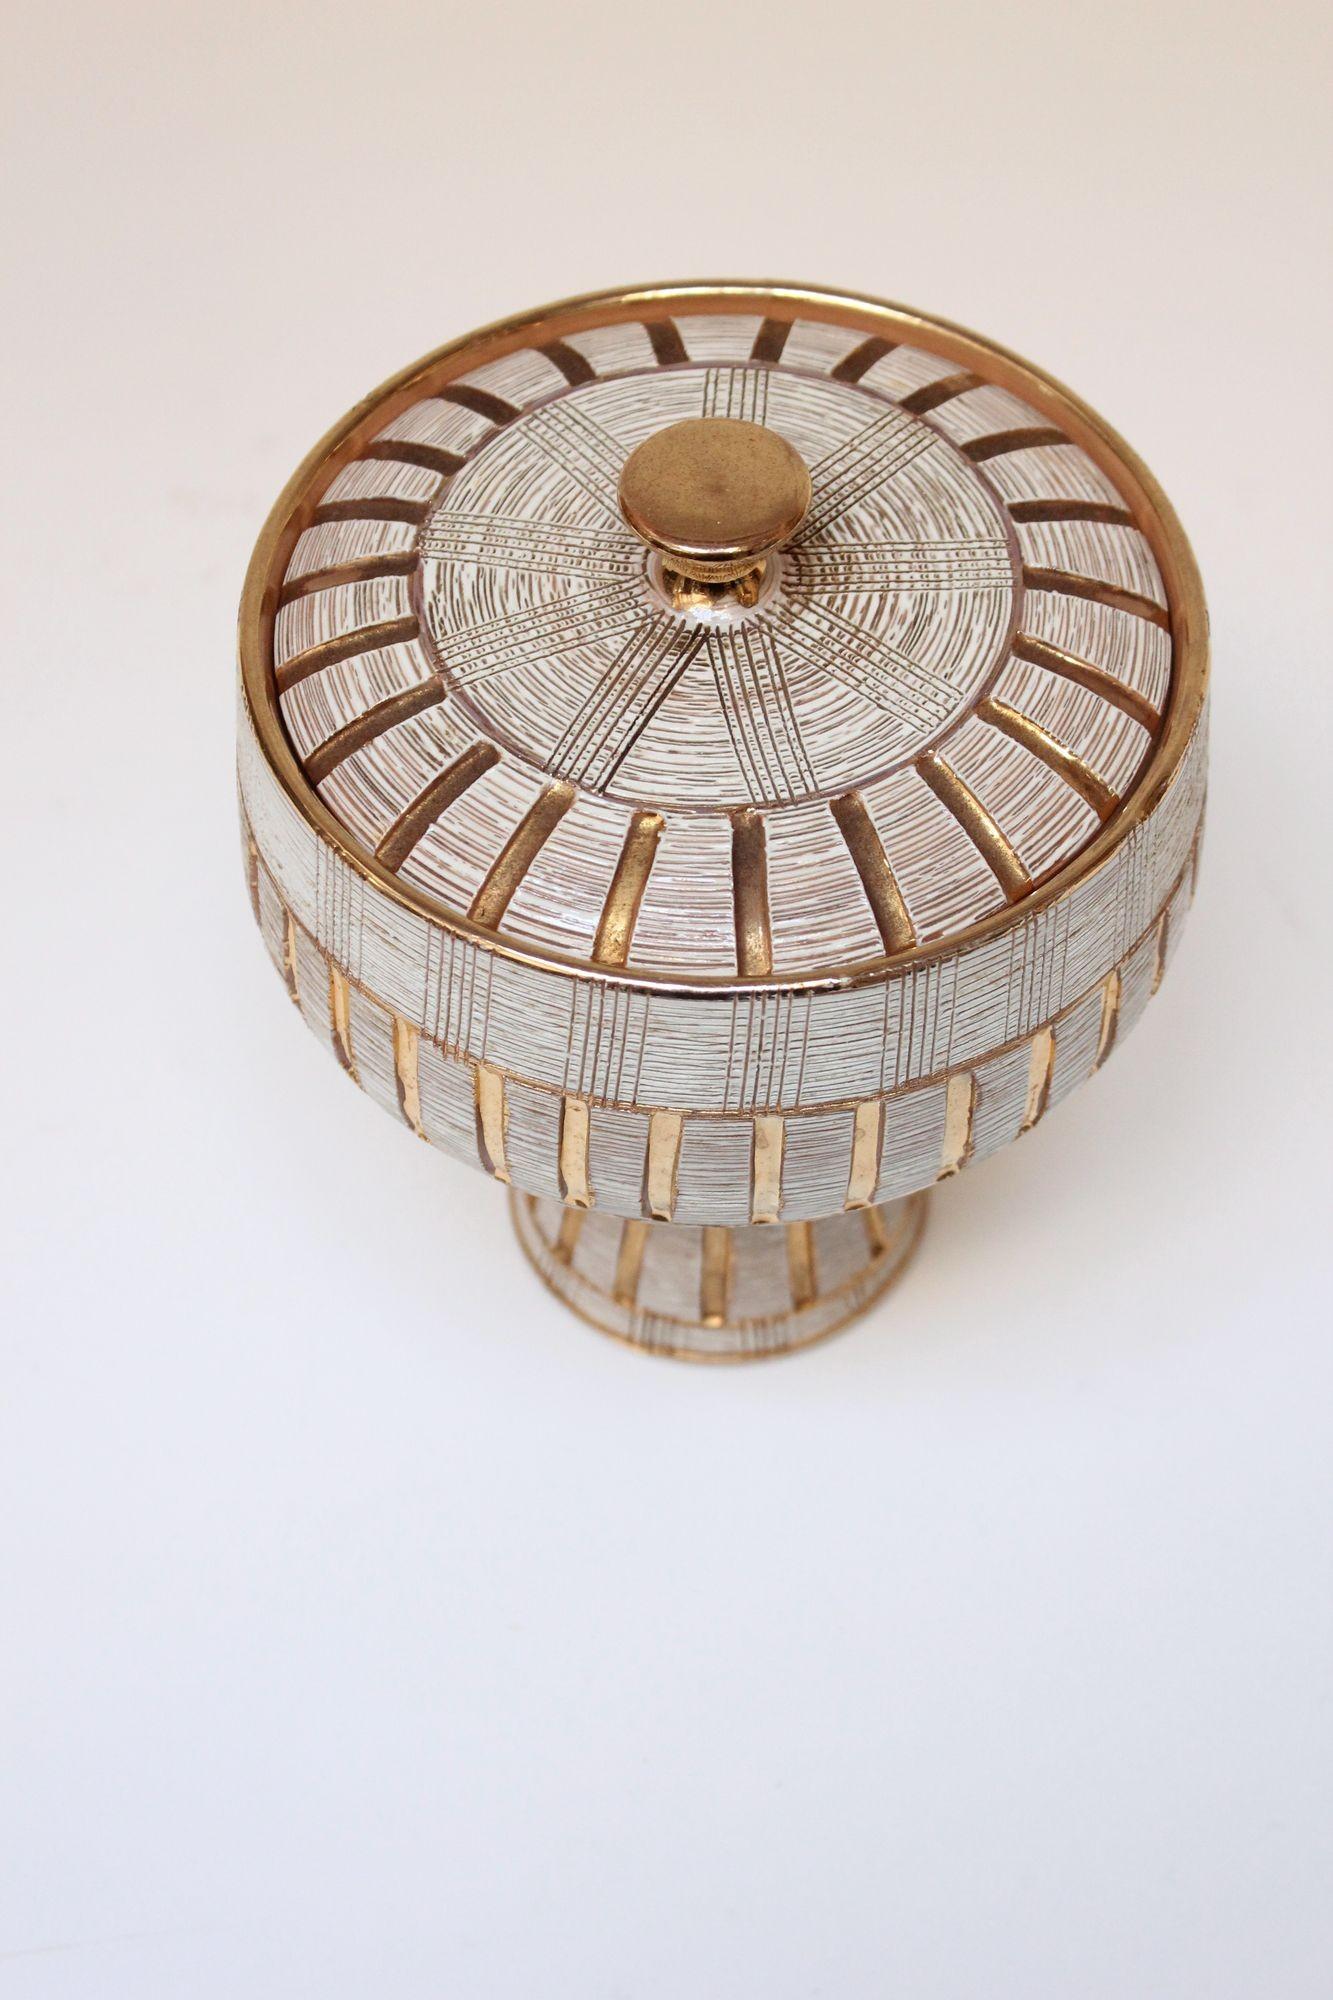 Mid-20th Century Italian Gold and White Glazed Incised Ceramic Compote by Aldo Londi for Bitossi